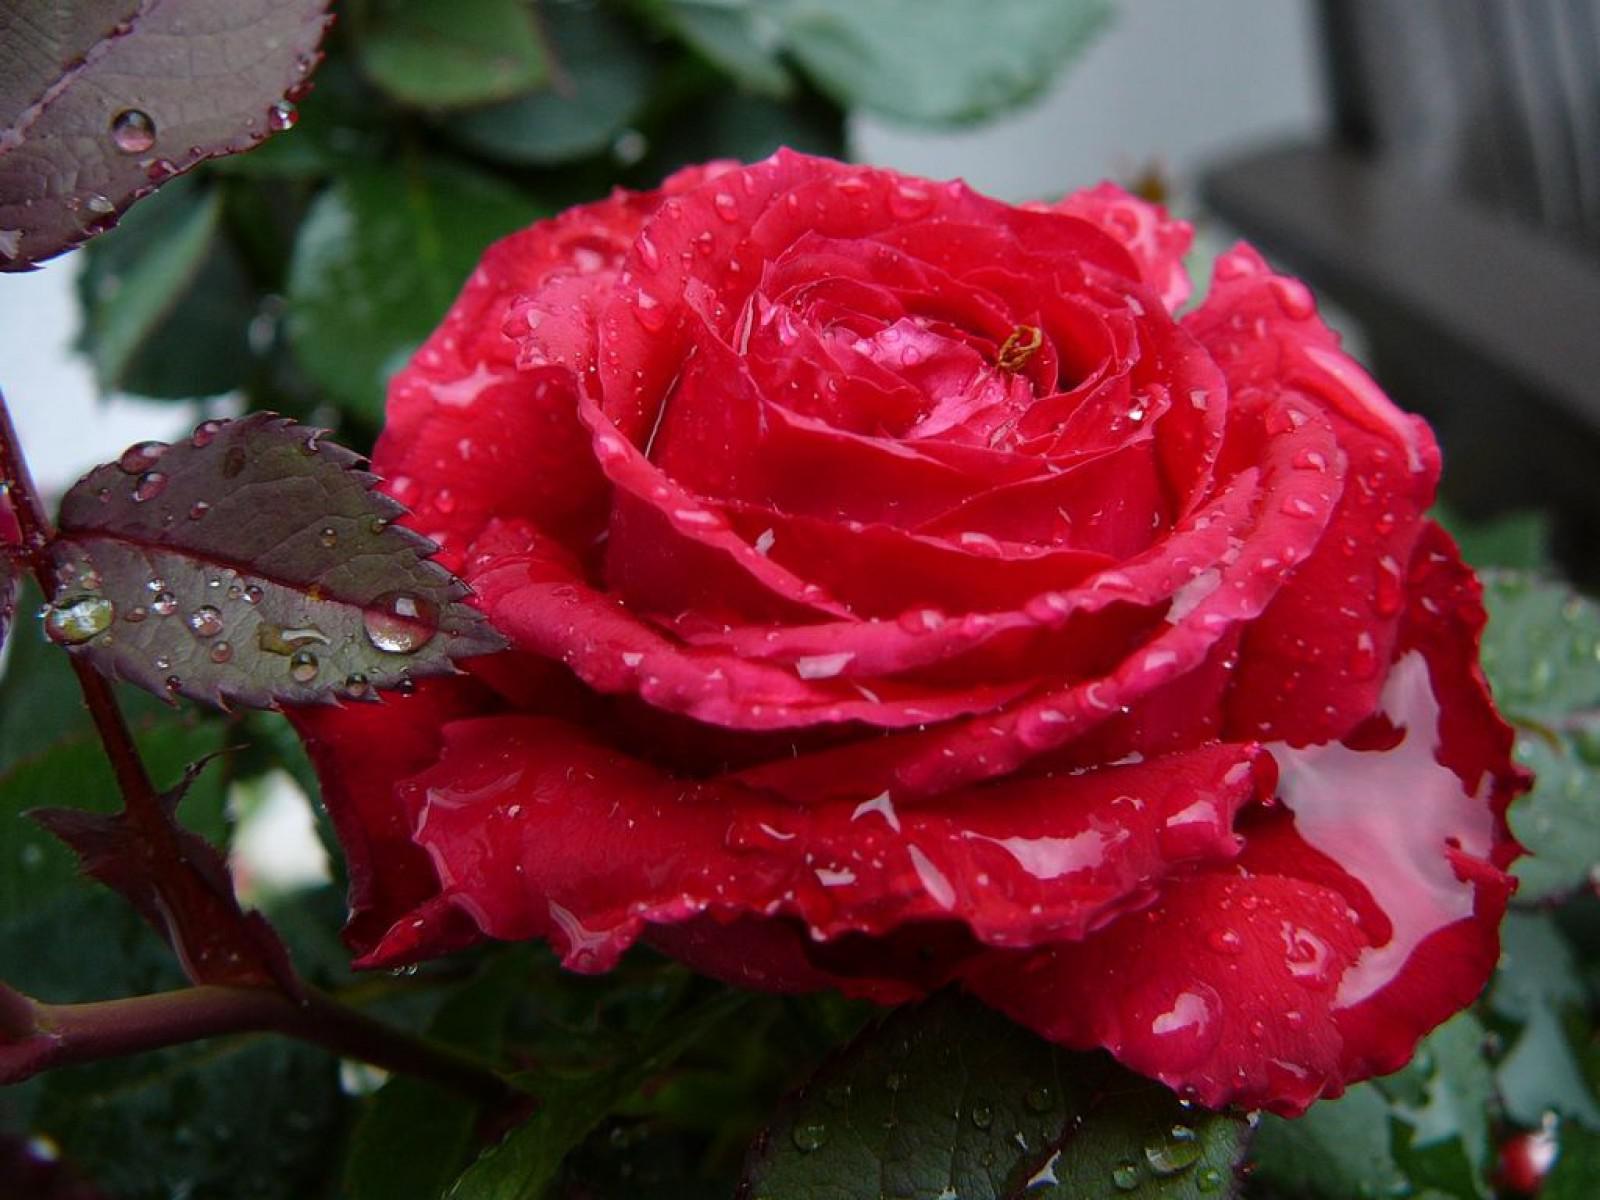 Red rose with water drops - High Quality and other